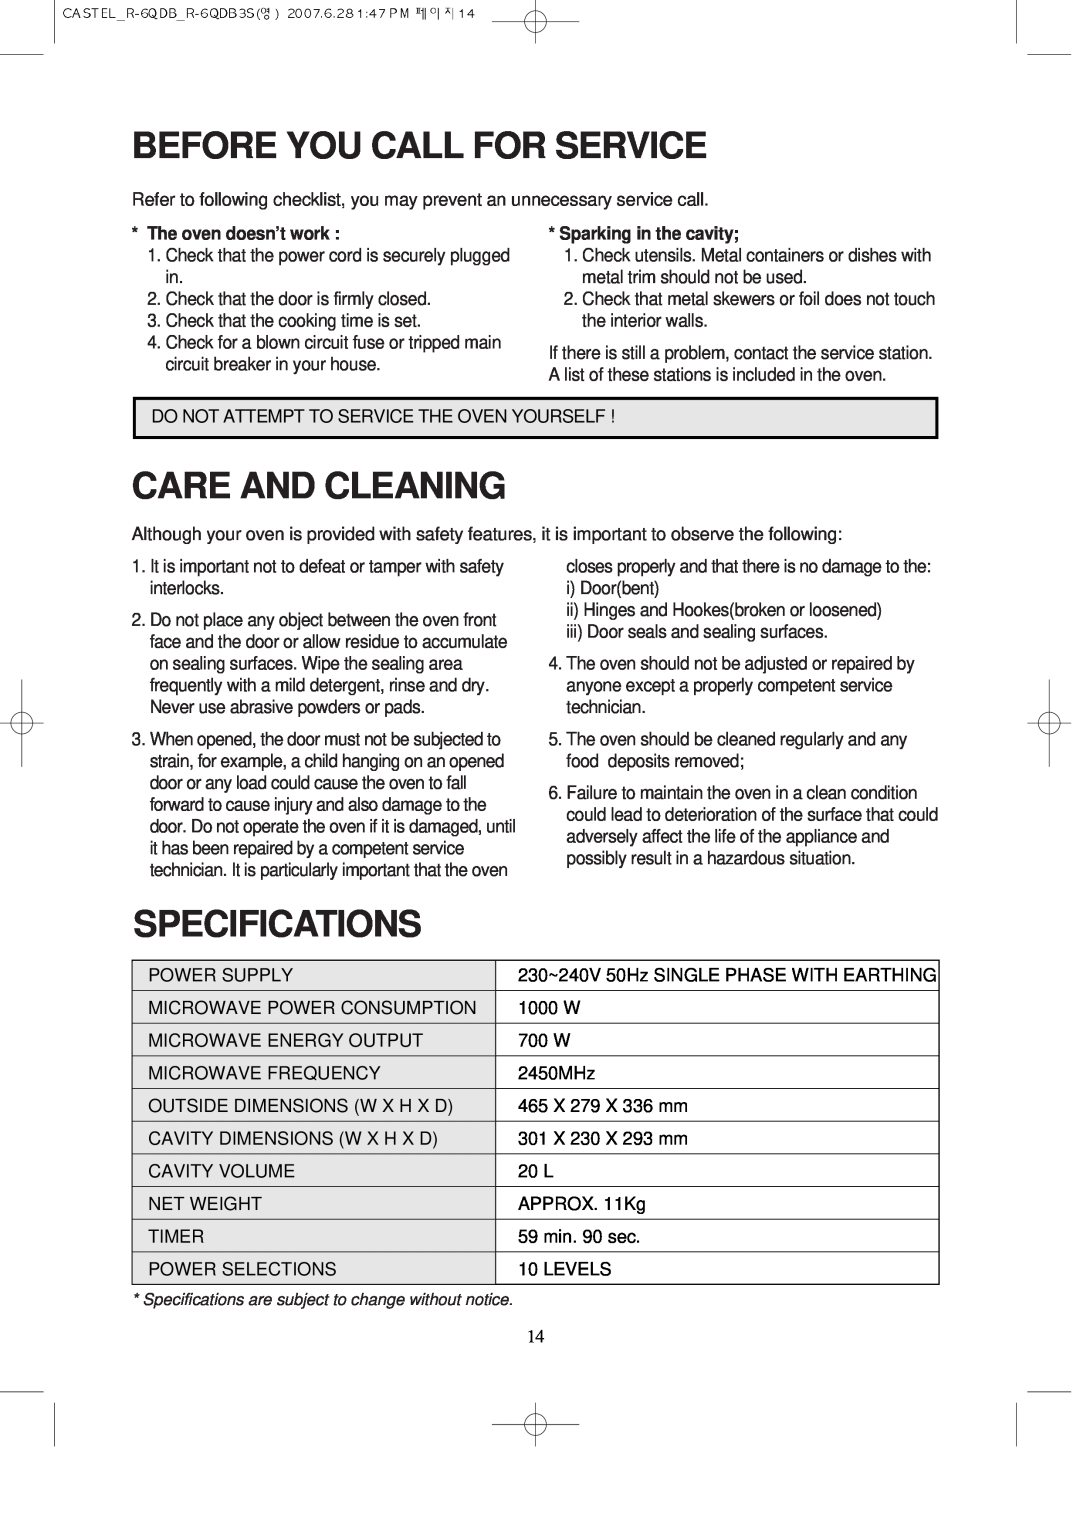 Daewoo KOR-6QDB manual Before You Call For Service, Care And Cleaning, Specifications, The oven doesn’t work 